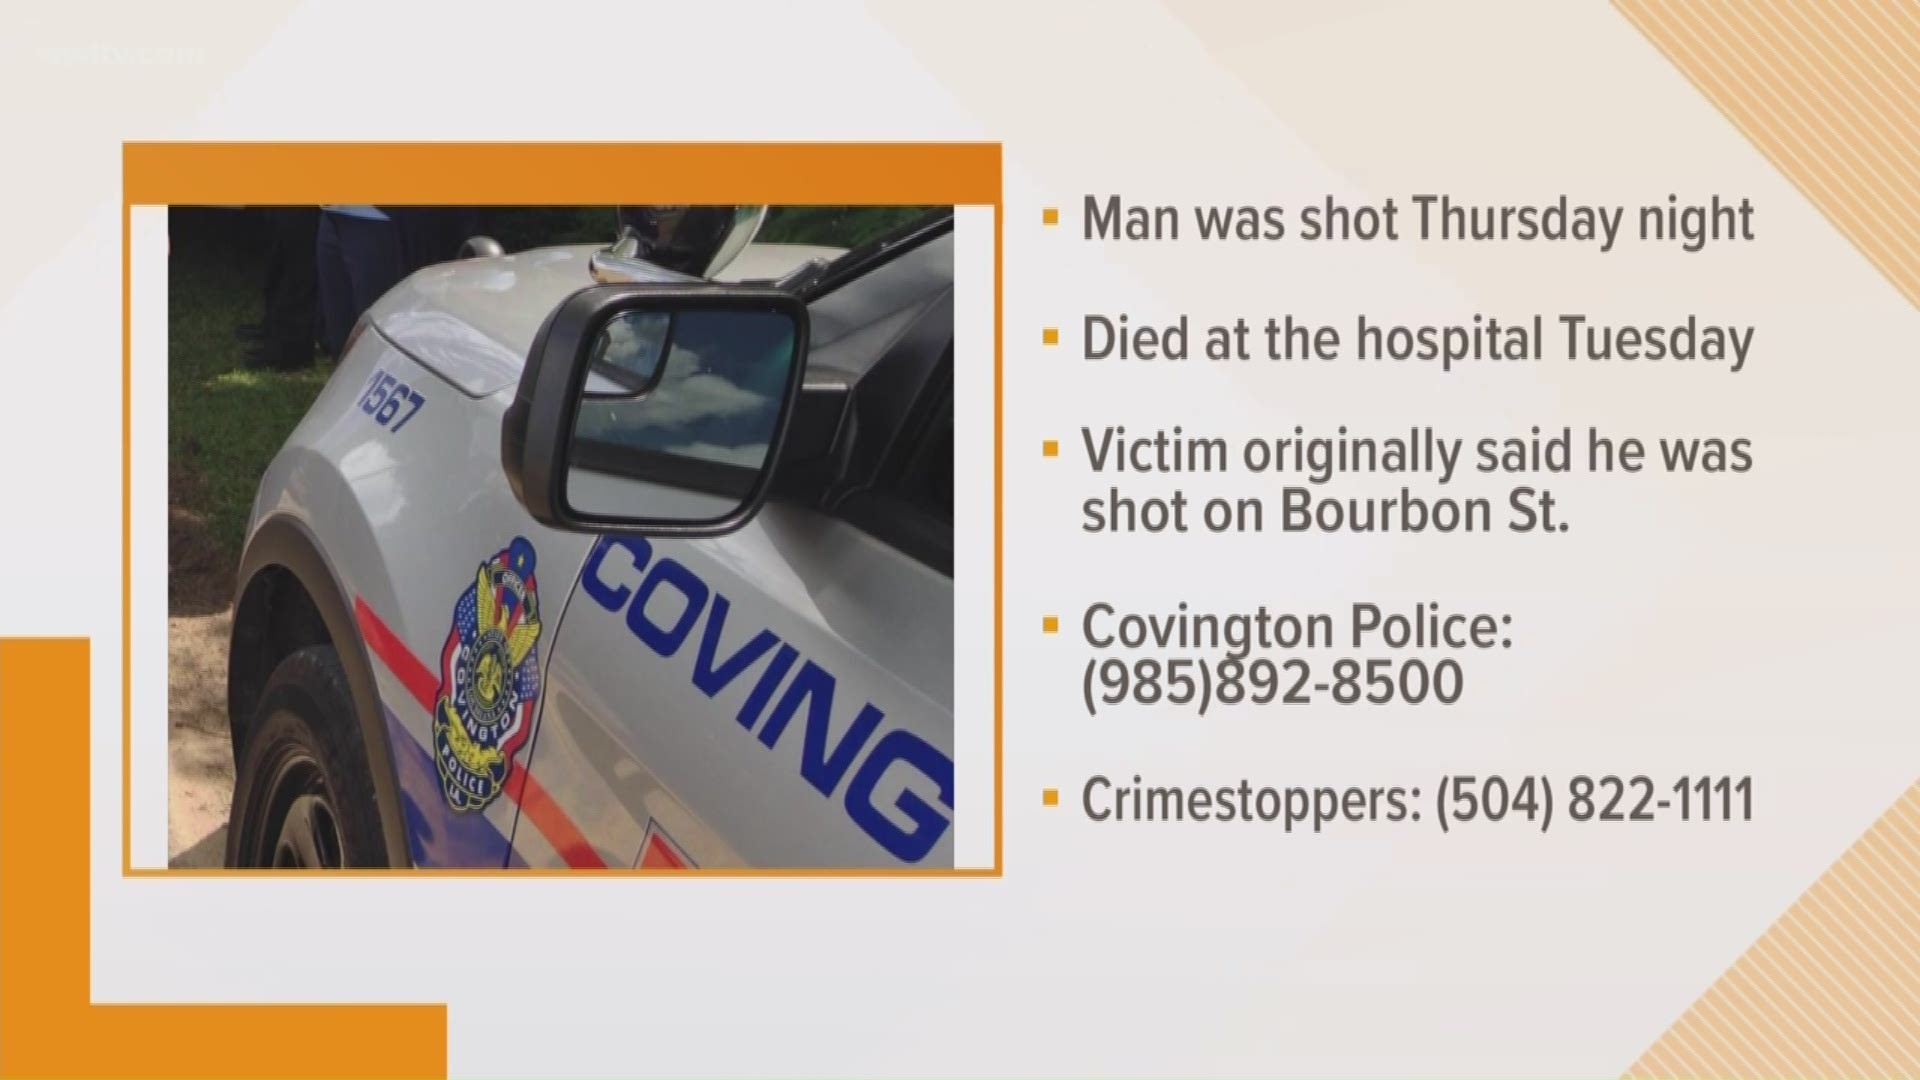 Covington Police say the man wasn't actually shot on Bourbon Street and falsified his report to the NOPD